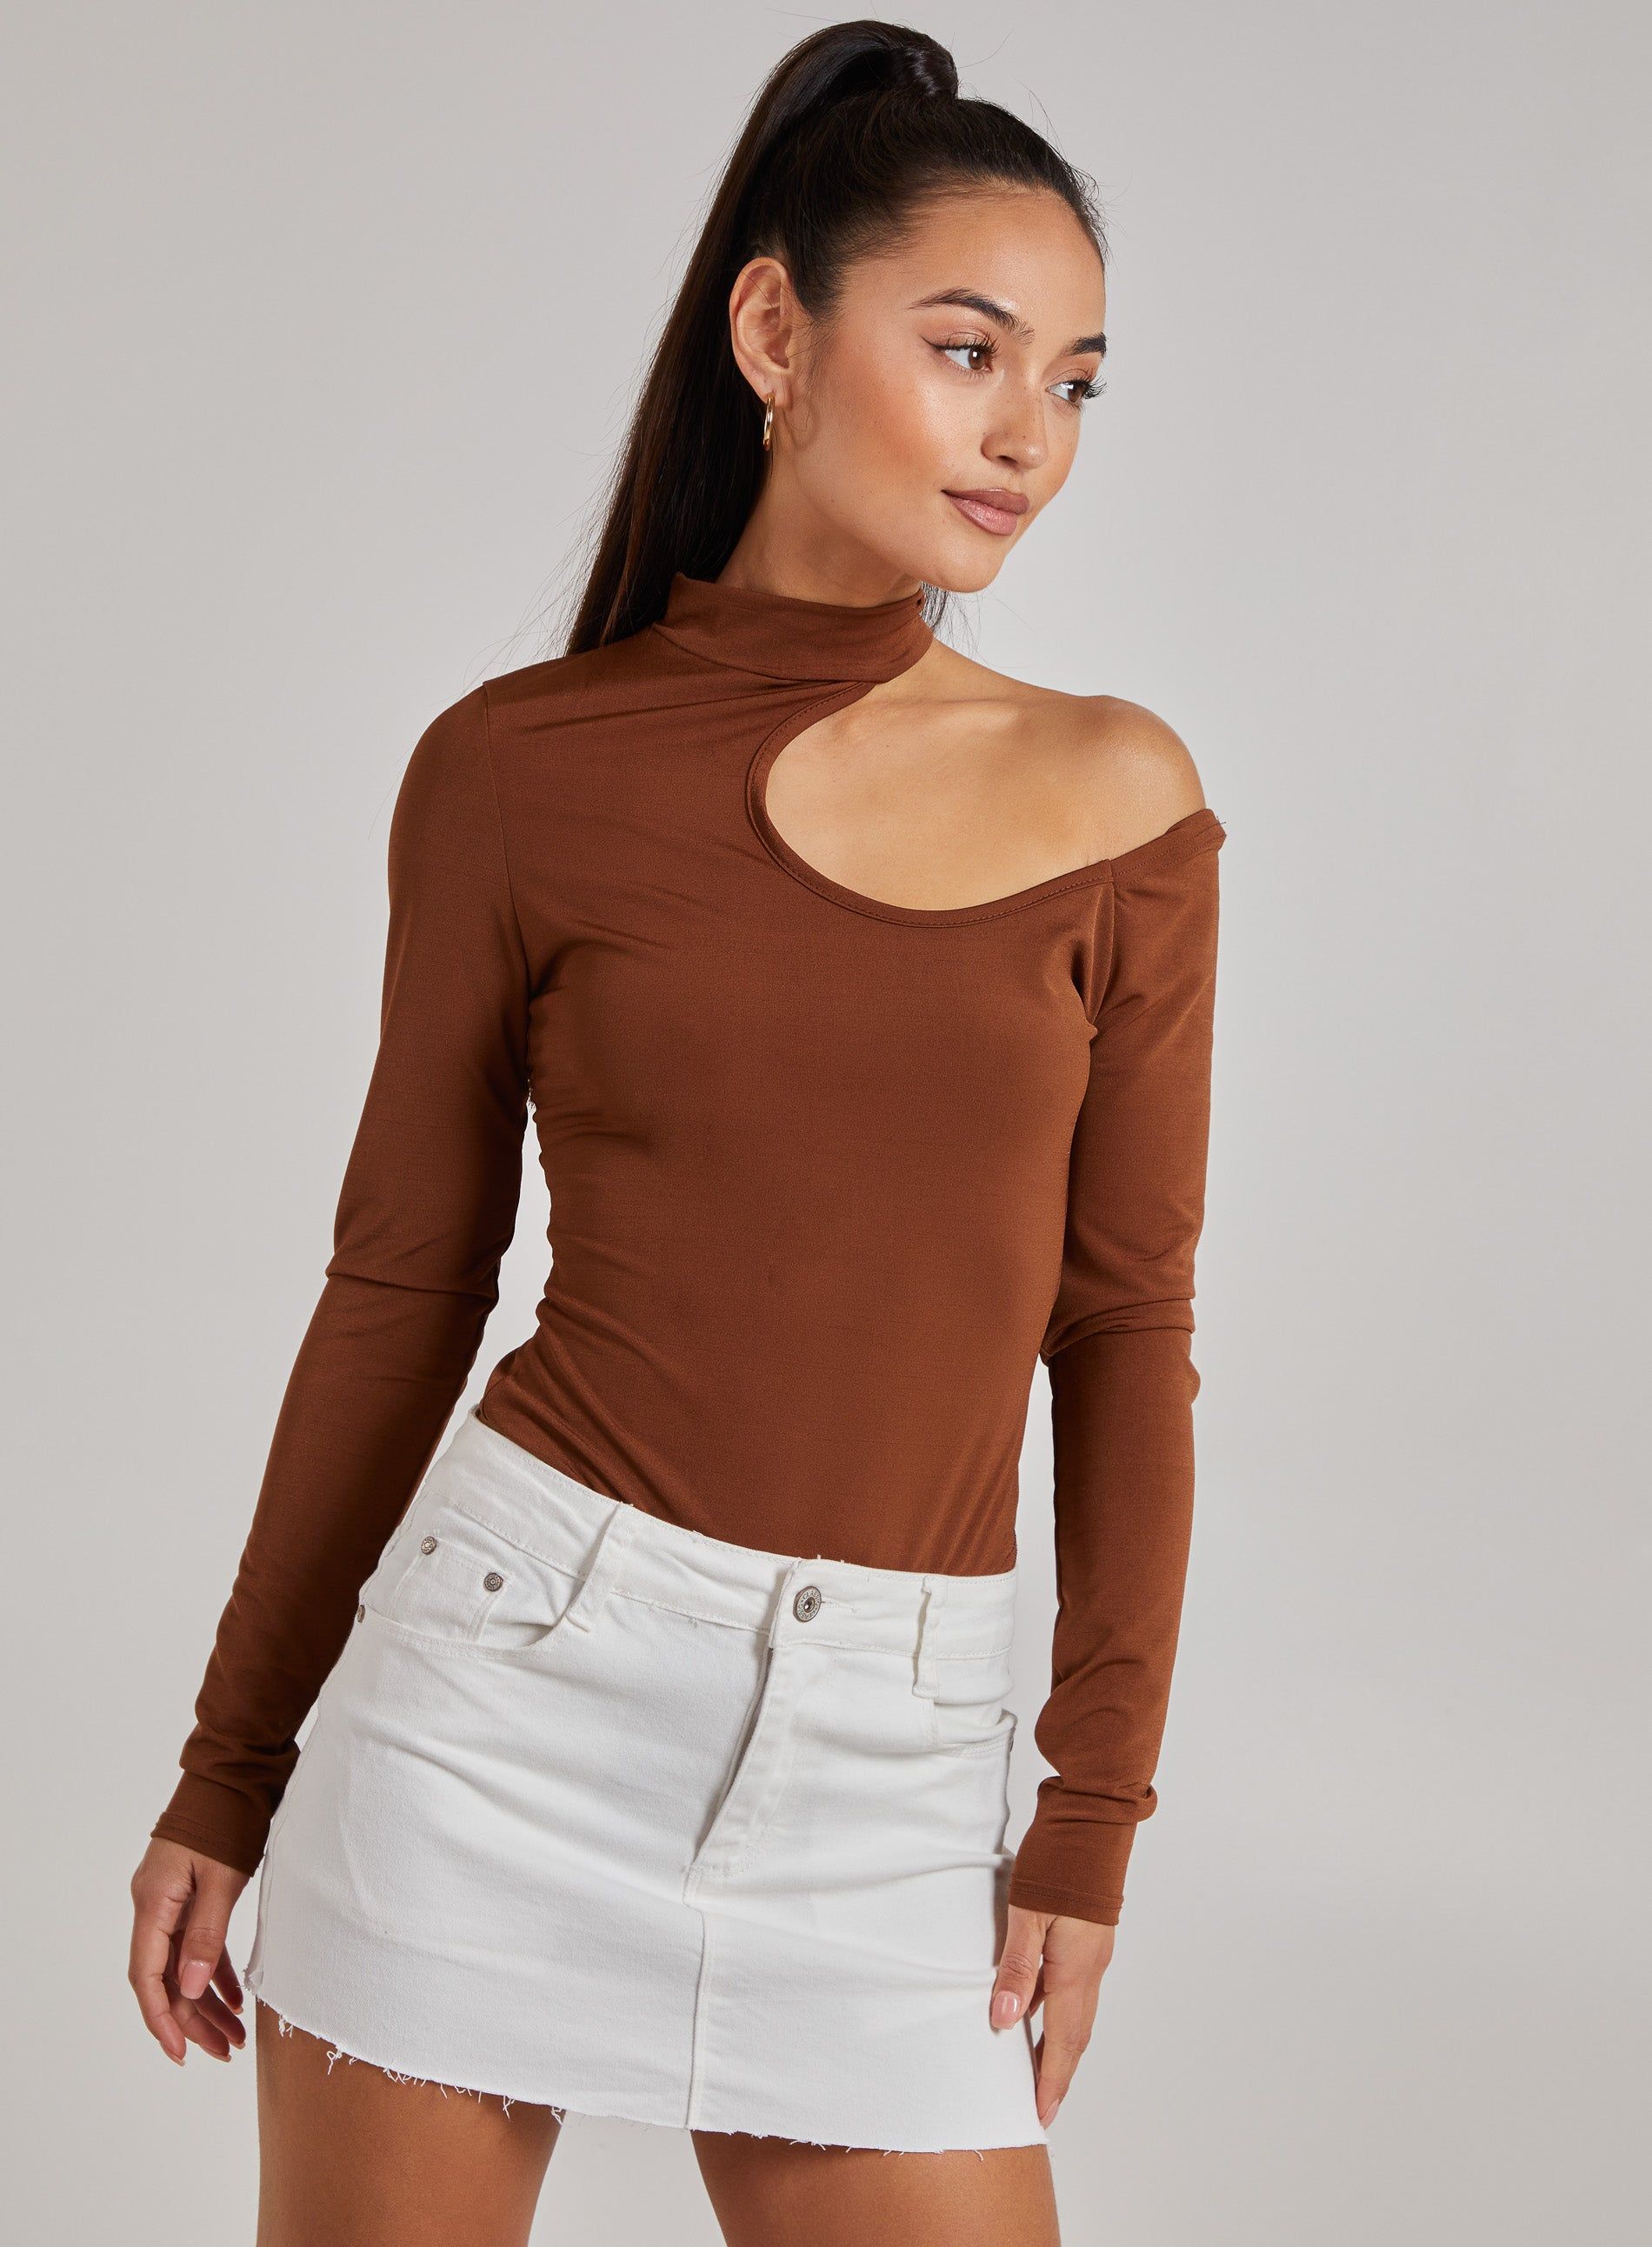 This simple yet sassy bodysuit is everything you need to add a little attitude to your look. Composition: 95% Polyester, 5% Elastane. Wash Care: Wash Dark Colours Separately